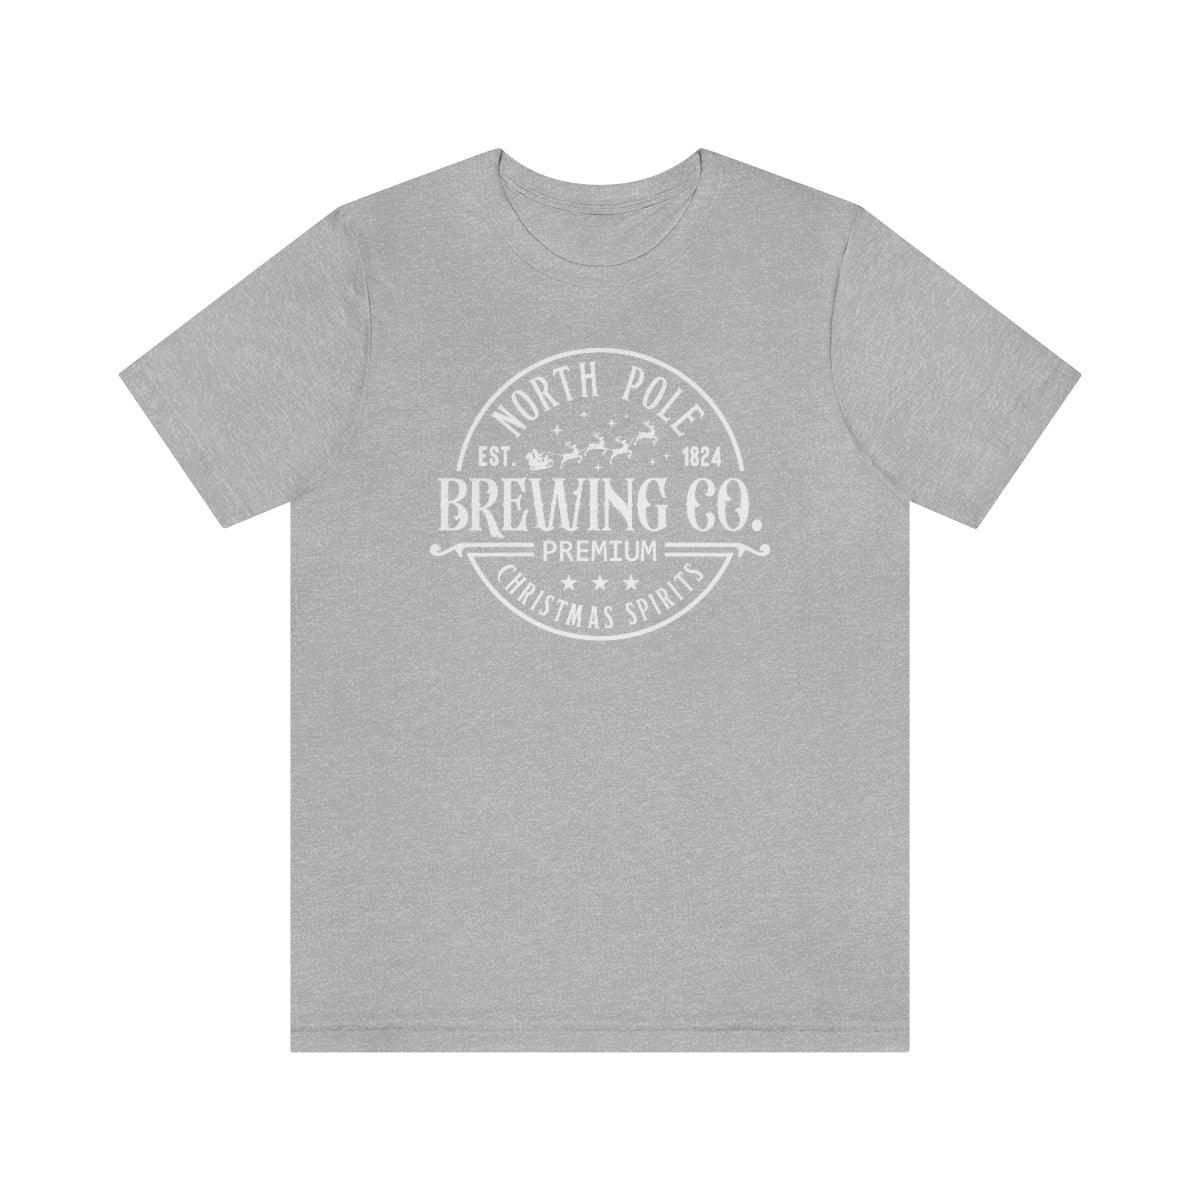 North Pole Brewing Co Christmas Shirt Short Sleeve Tee - Crystal Rose Design Co.